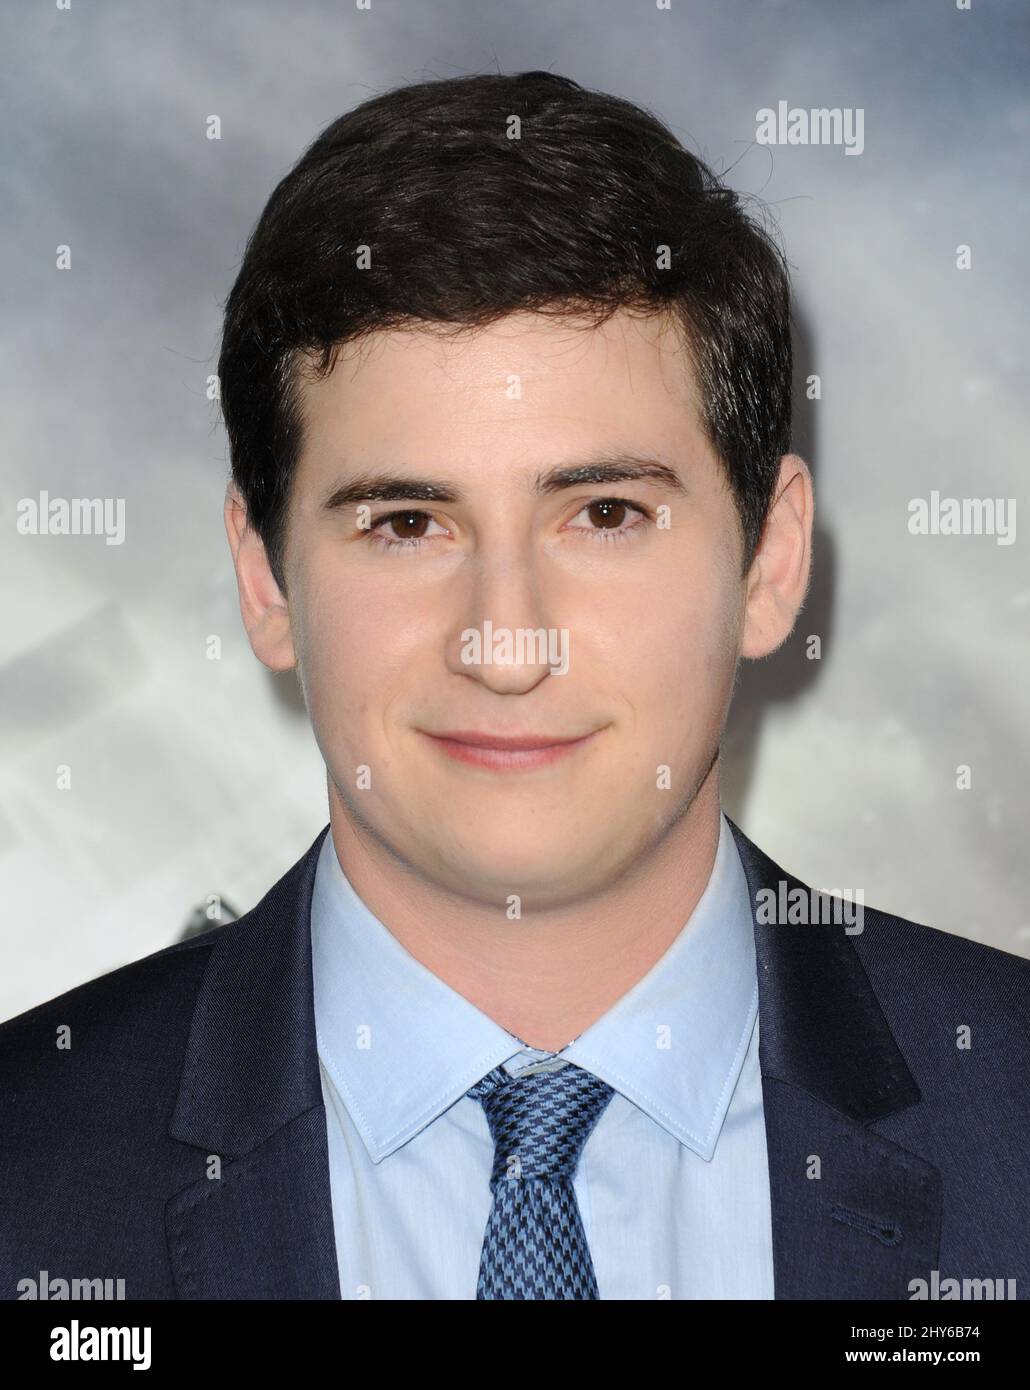 Sam Lerner attending the 'Project Almanac' Los Angeles Premiere held at TCL Chinese Theatre Stock Photo